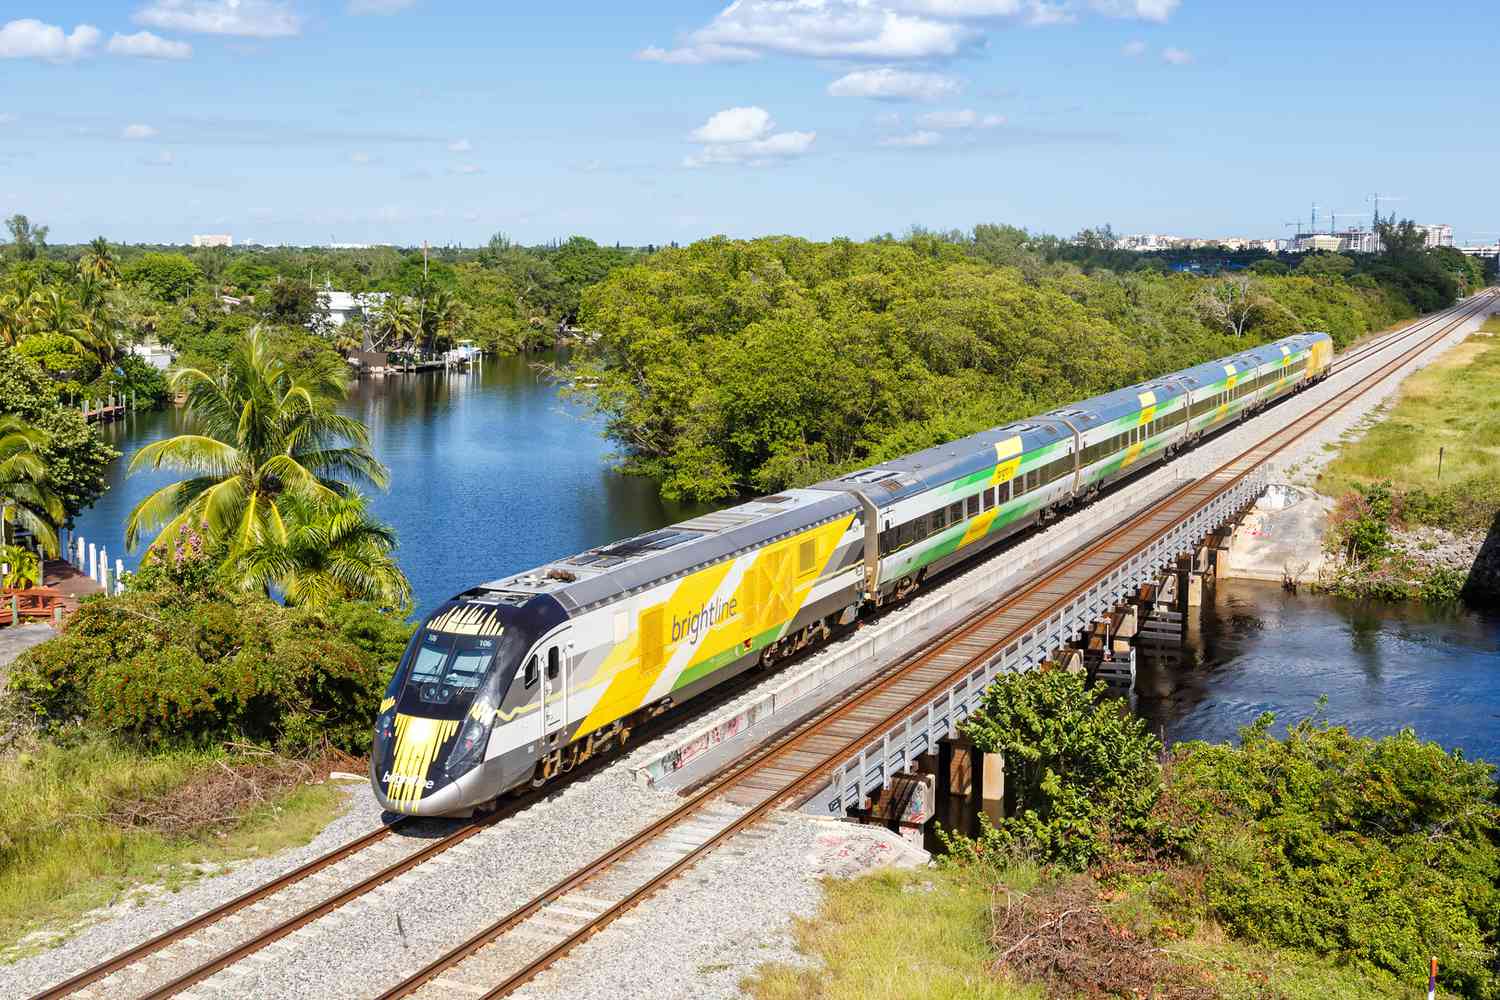 15-facts-about-transportation-and-infrastructure-in-boca-raton-florida